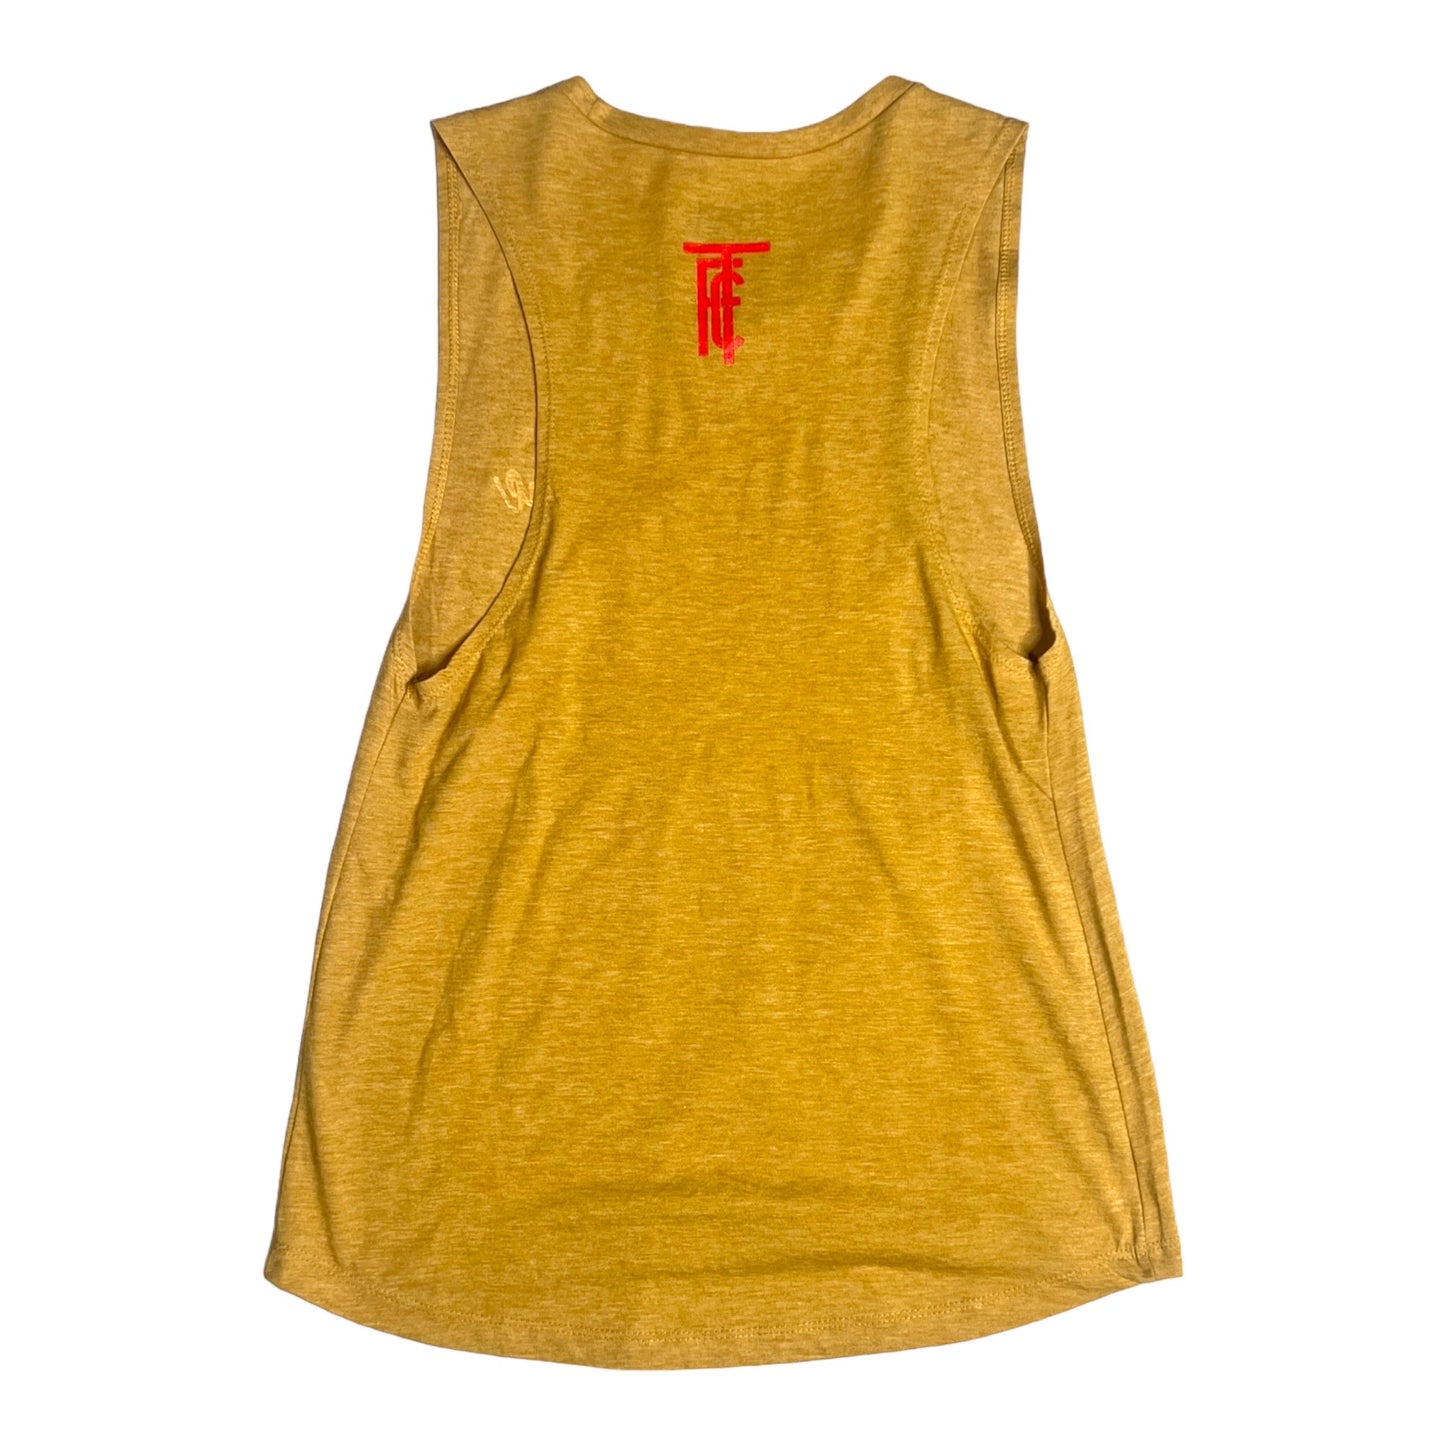 Women's Muscle Tank Antique Gold/Red Logo